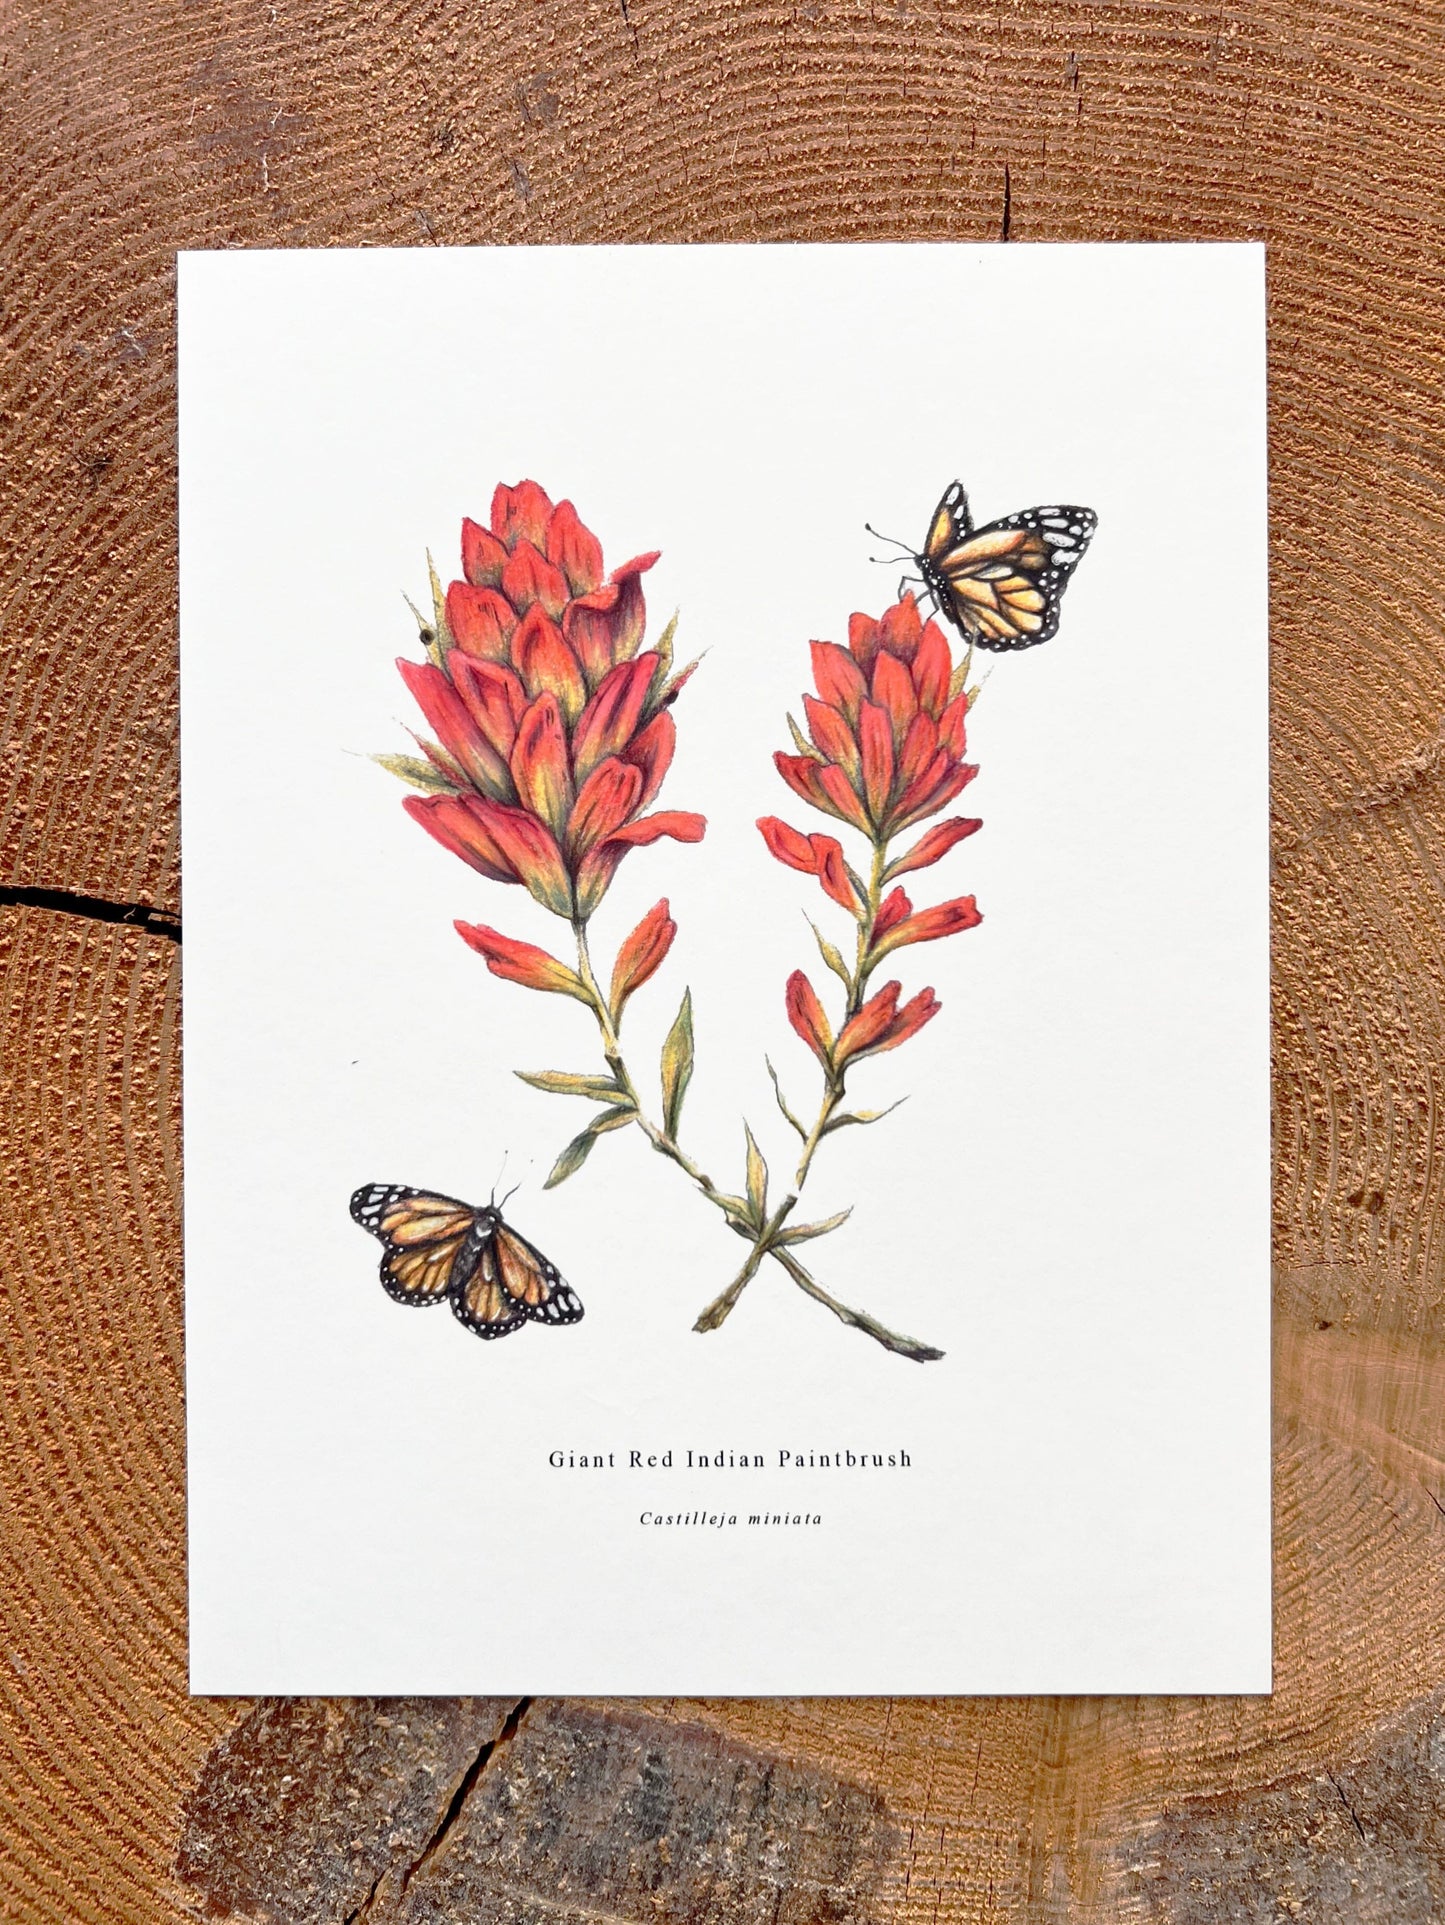 Wildflower Series: Giant Red Indian Paintbrush